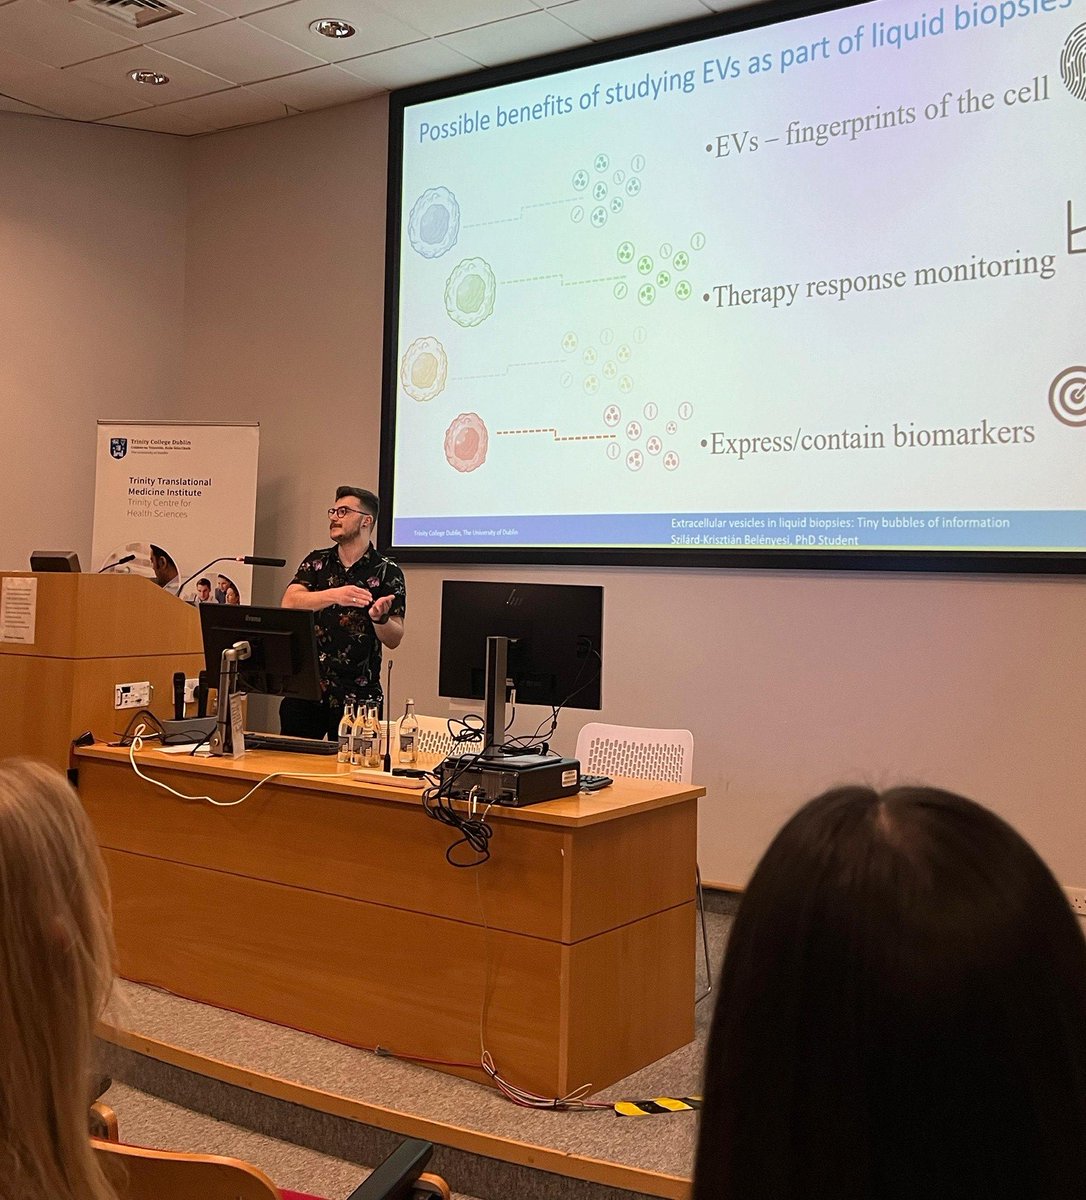 Our @CluB_Cancer1 #PhD Candidate @Kris_Belenyesi MD, presenting 'Extracellular vesicles in liquid biopsies: tiny bubbles of information' at today's Faculty of Health Sciences Research Blitz 👏 fantastic work ... @tcdTBSI @CancerInstIRE @TCDPharmacy @hea_irl #NSRPproject